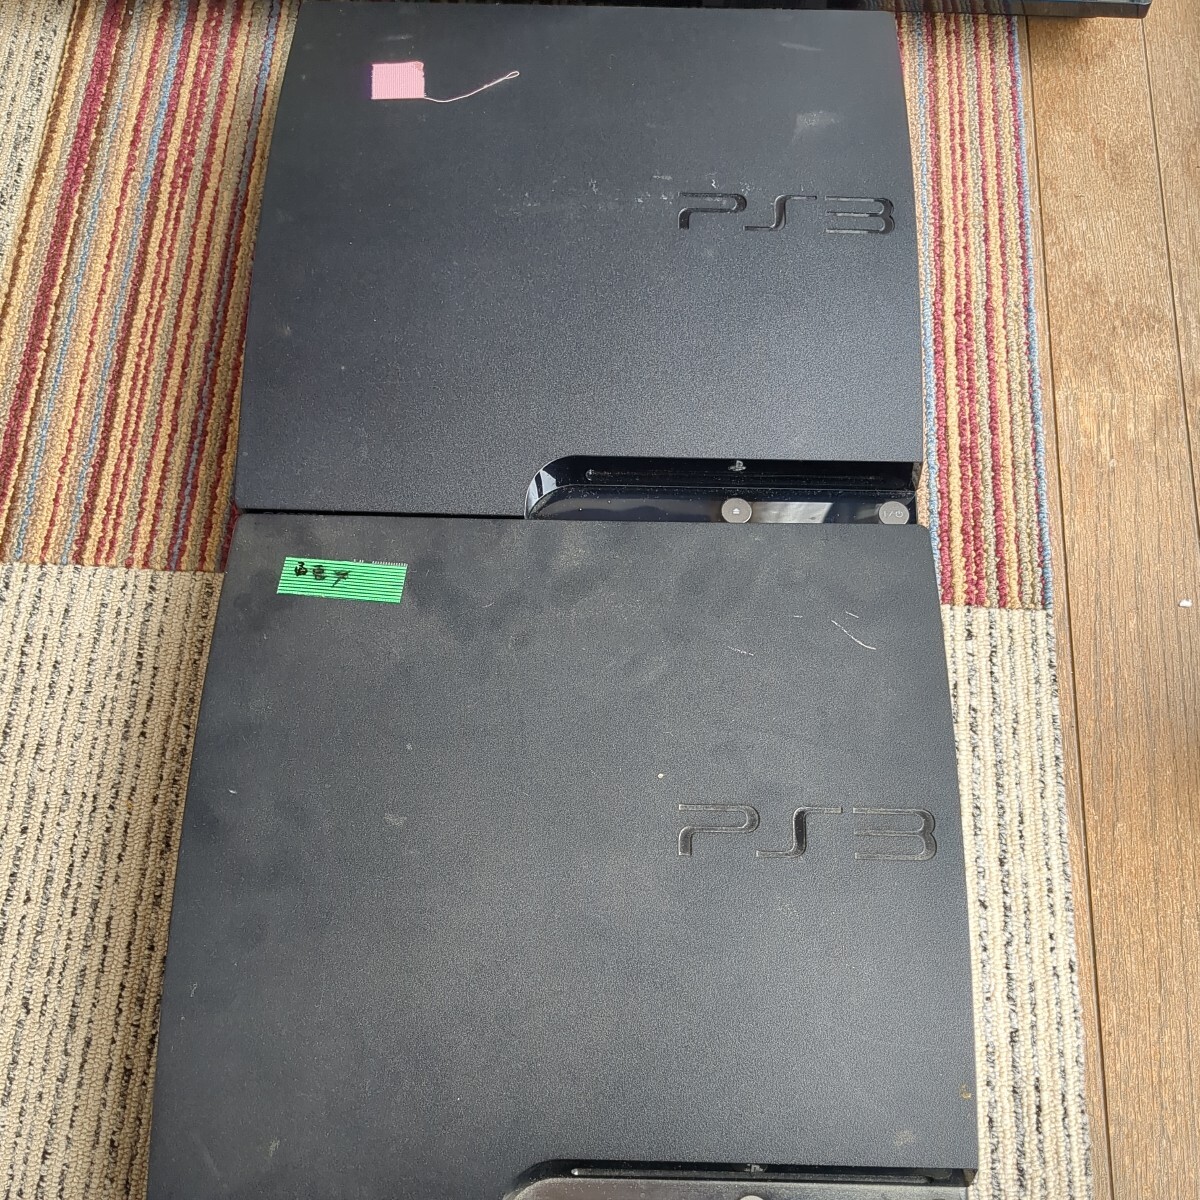  Junk game machine body SONY PS3 CECH 2000A 2500A 3000B 6 pcs set sale together Sony PlayStation 3. seal seal equipped 